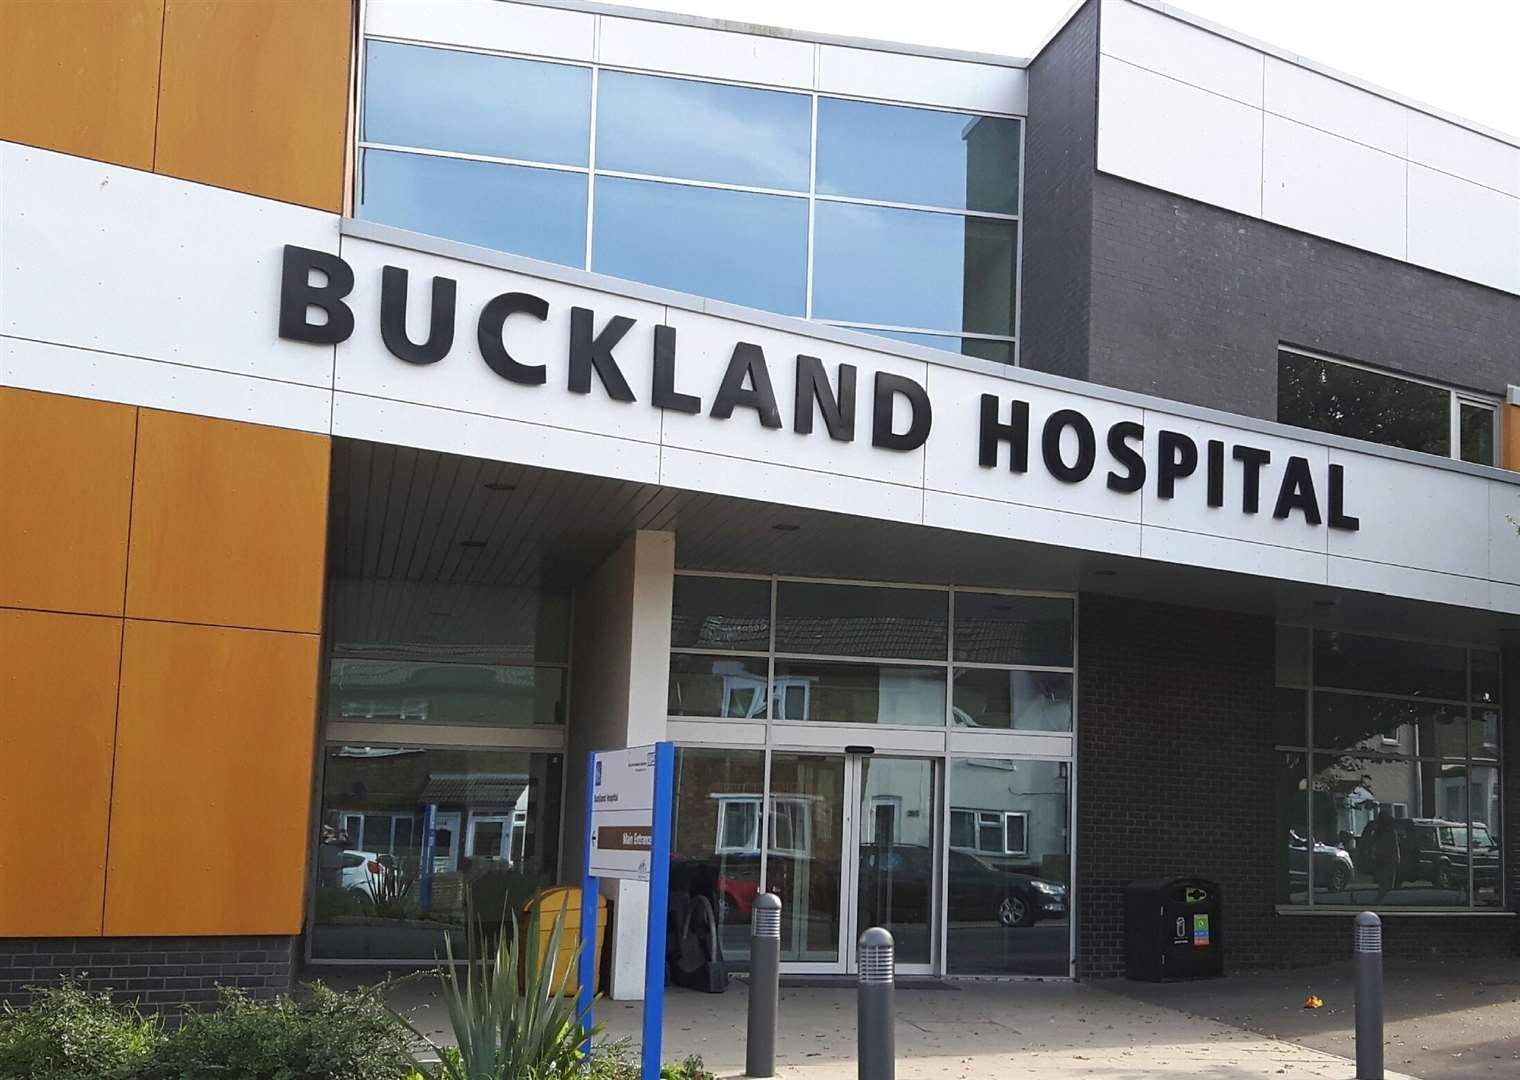 The child was initially taken to Dover's Buckland Hospital and found to have a broken wrist